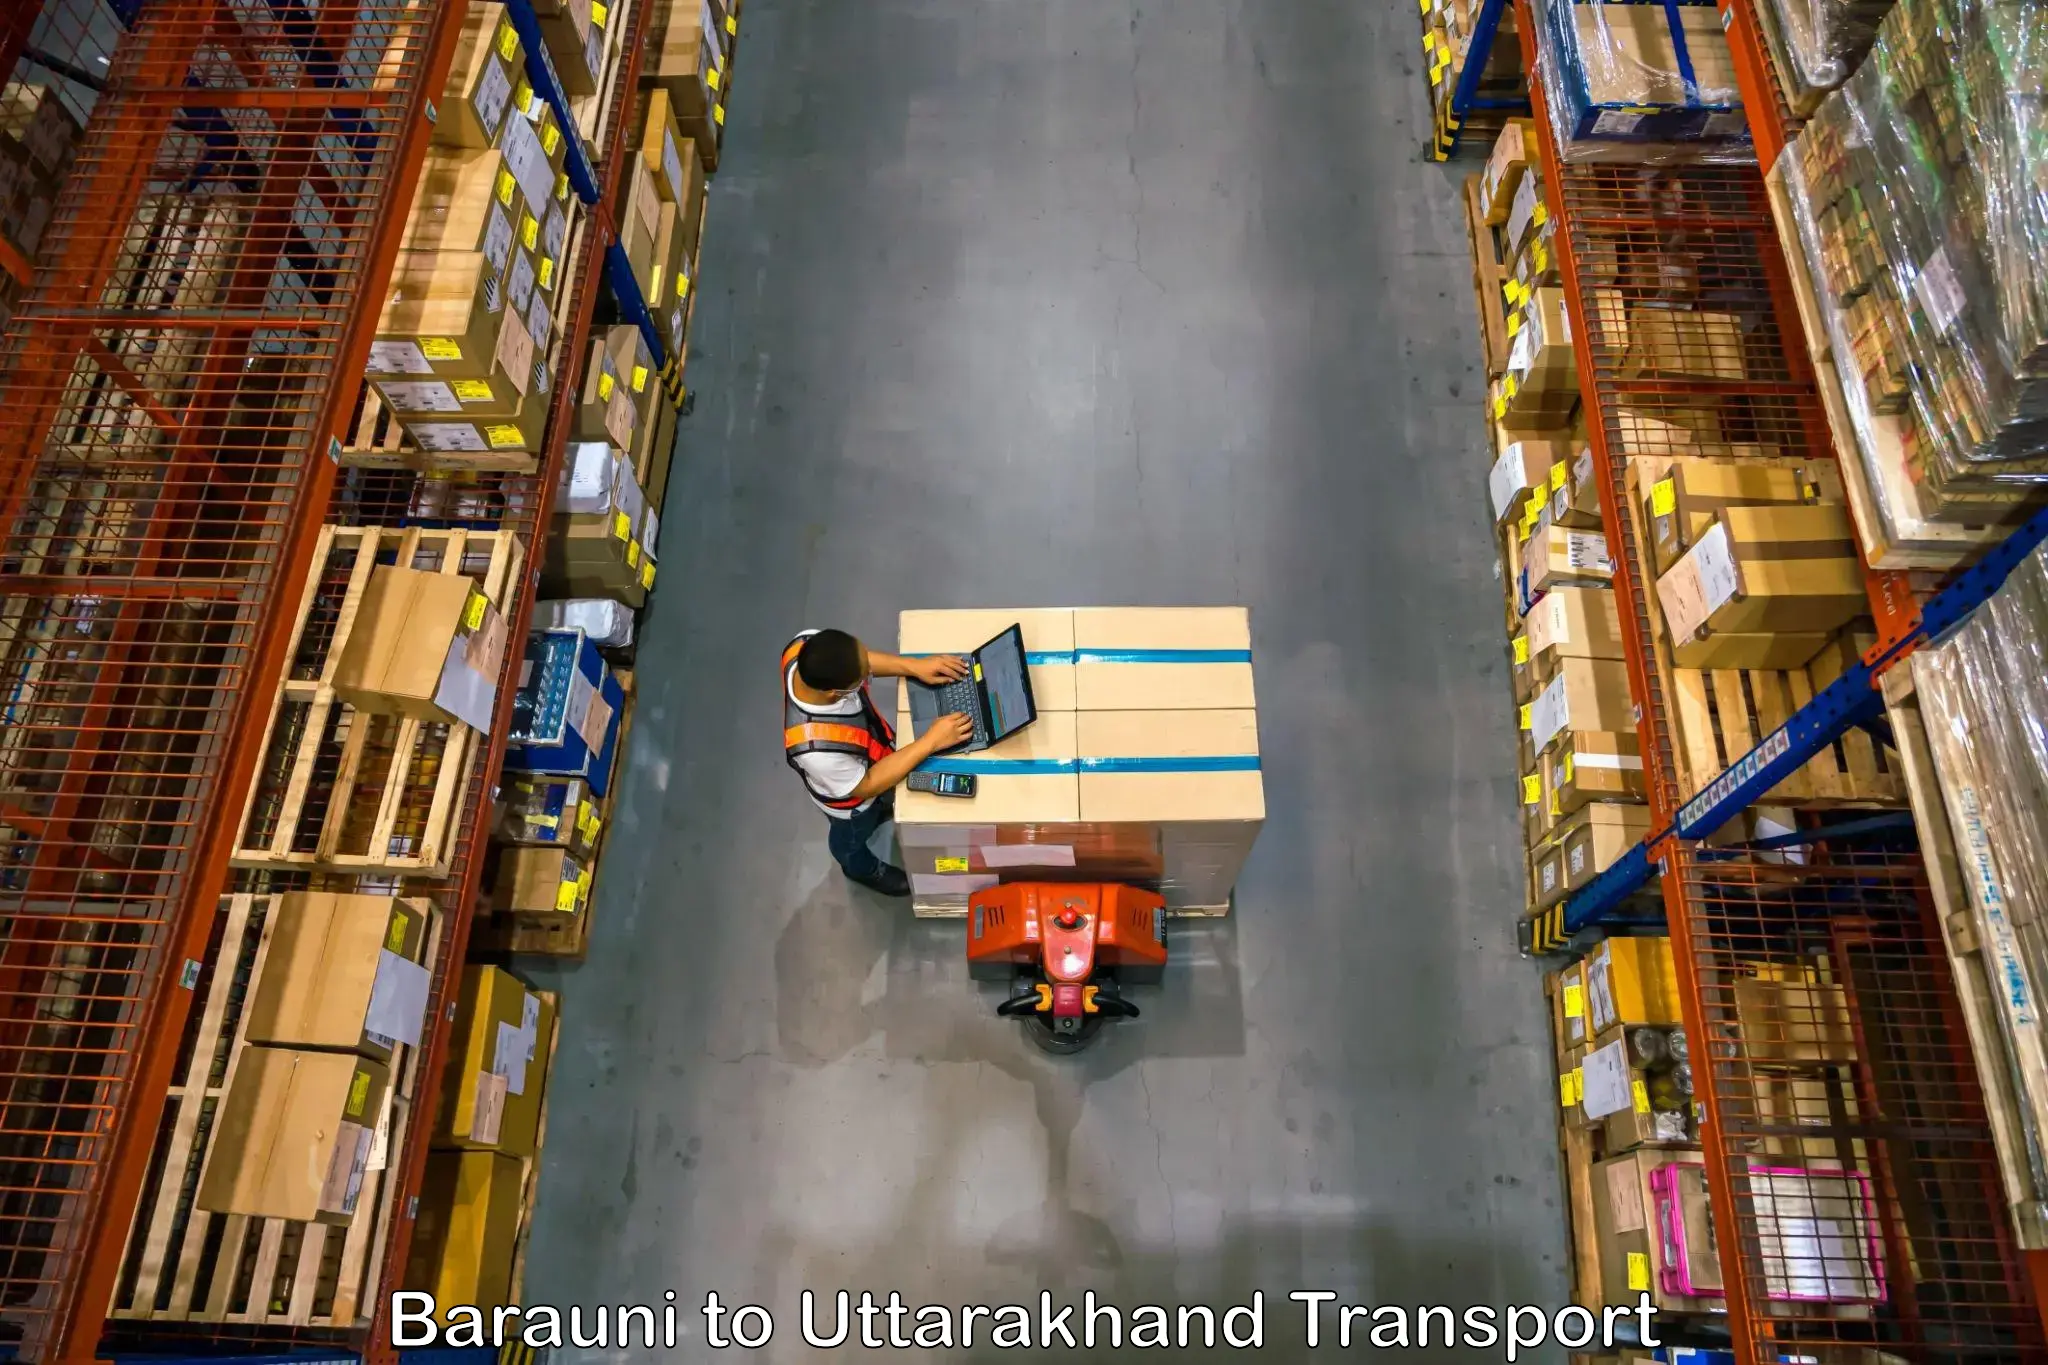 Truck transport companies in India Barauni to Kashipur